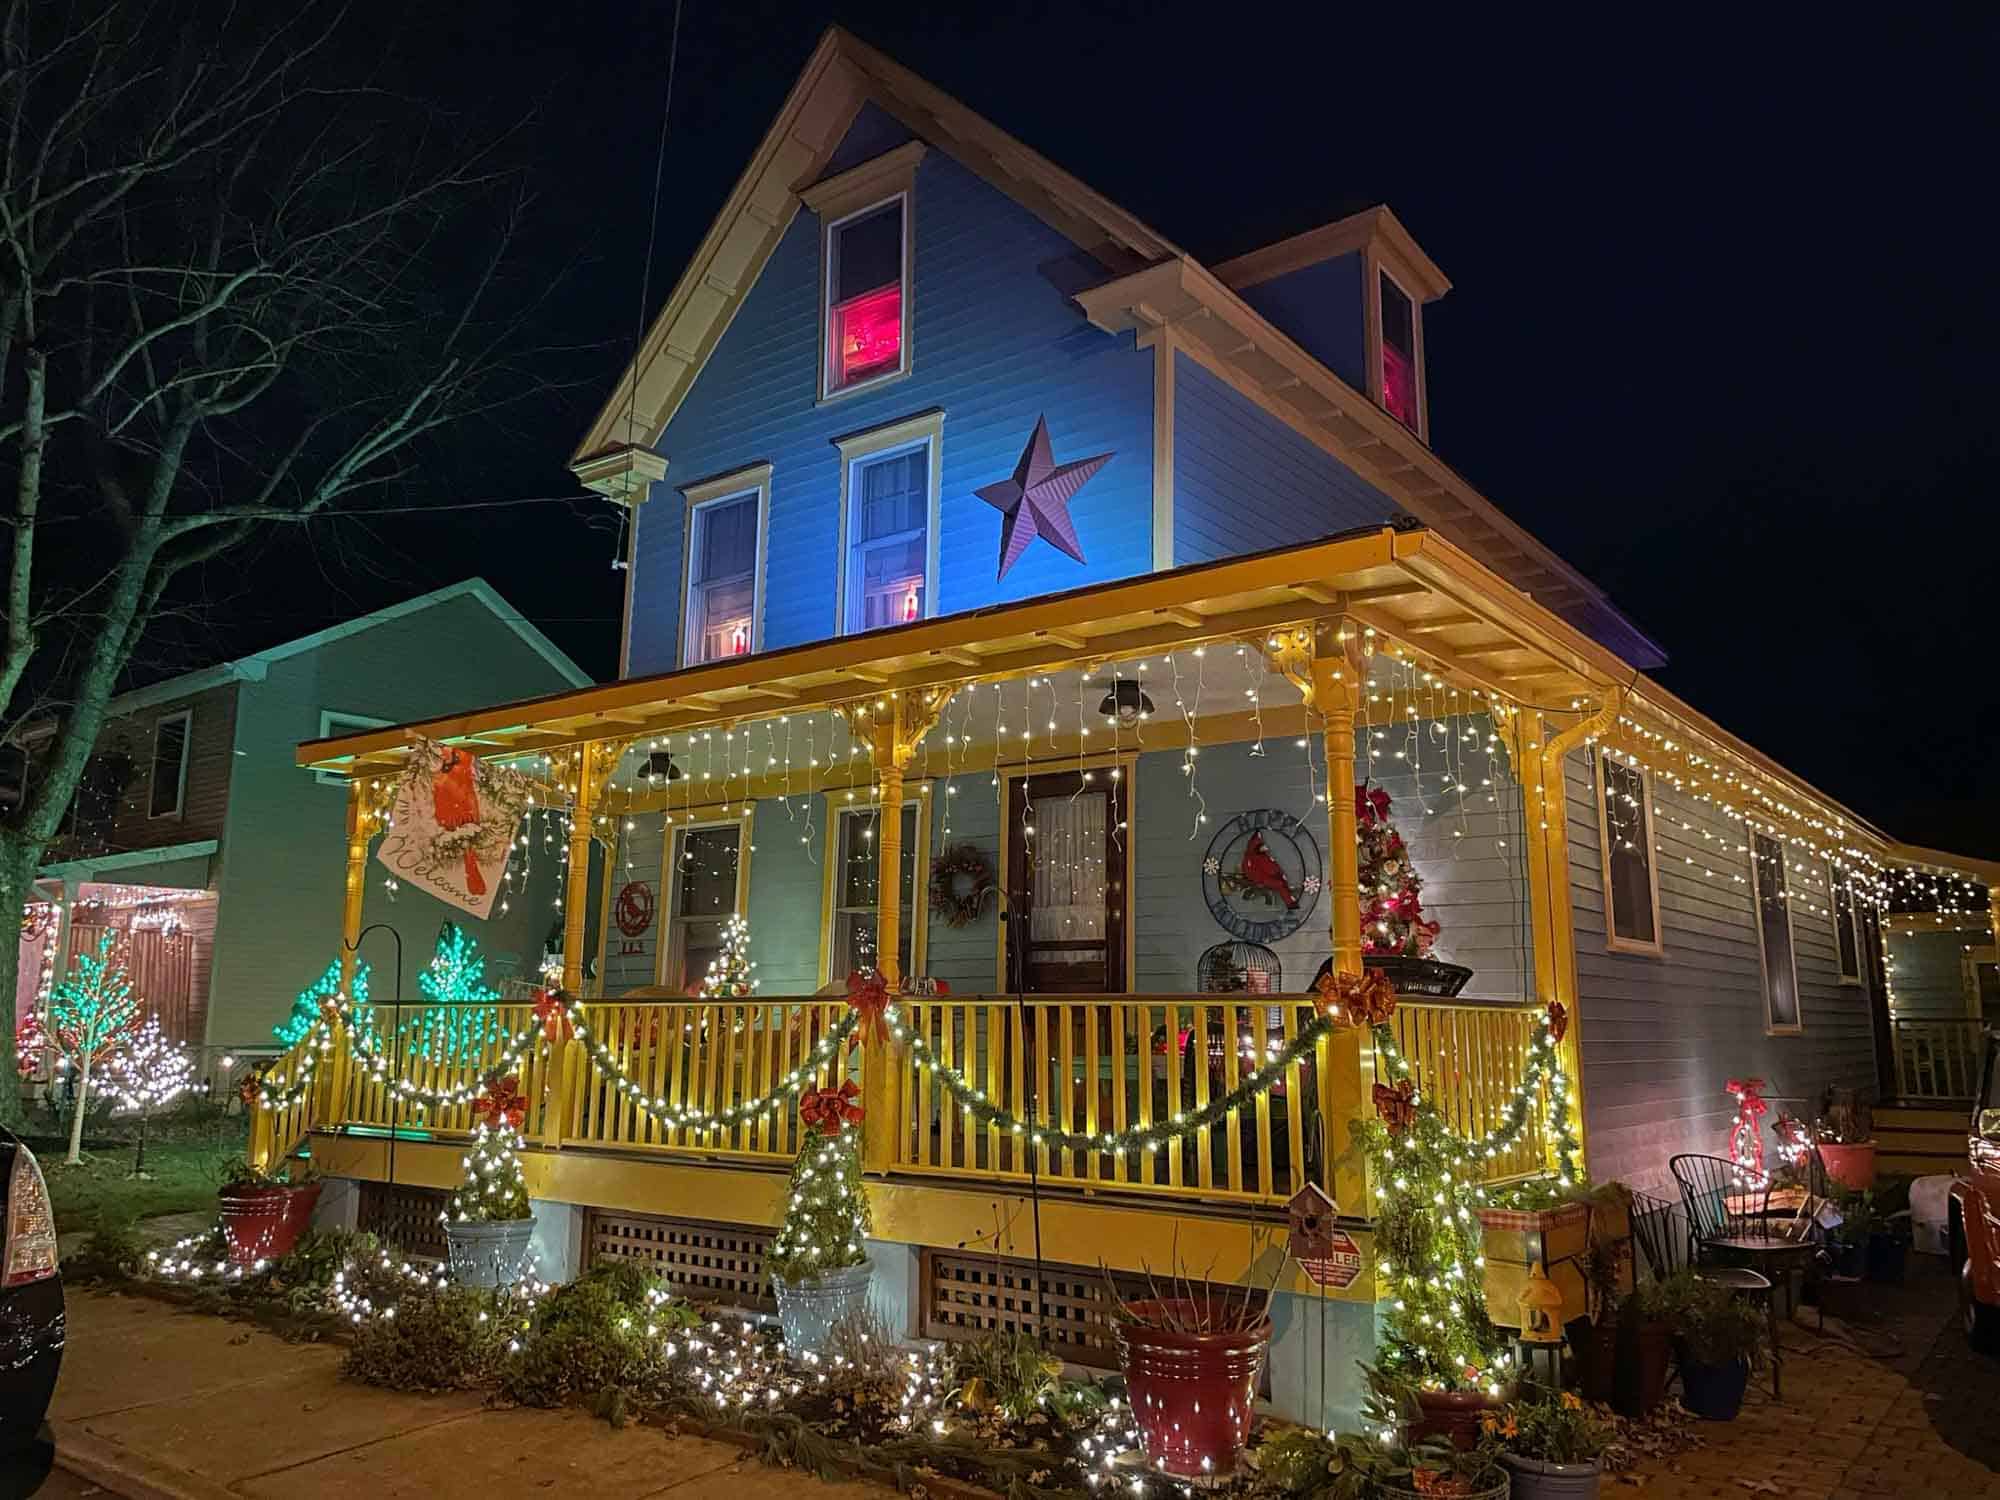 Brightly-colored house lit with Christmas lights in Cape May